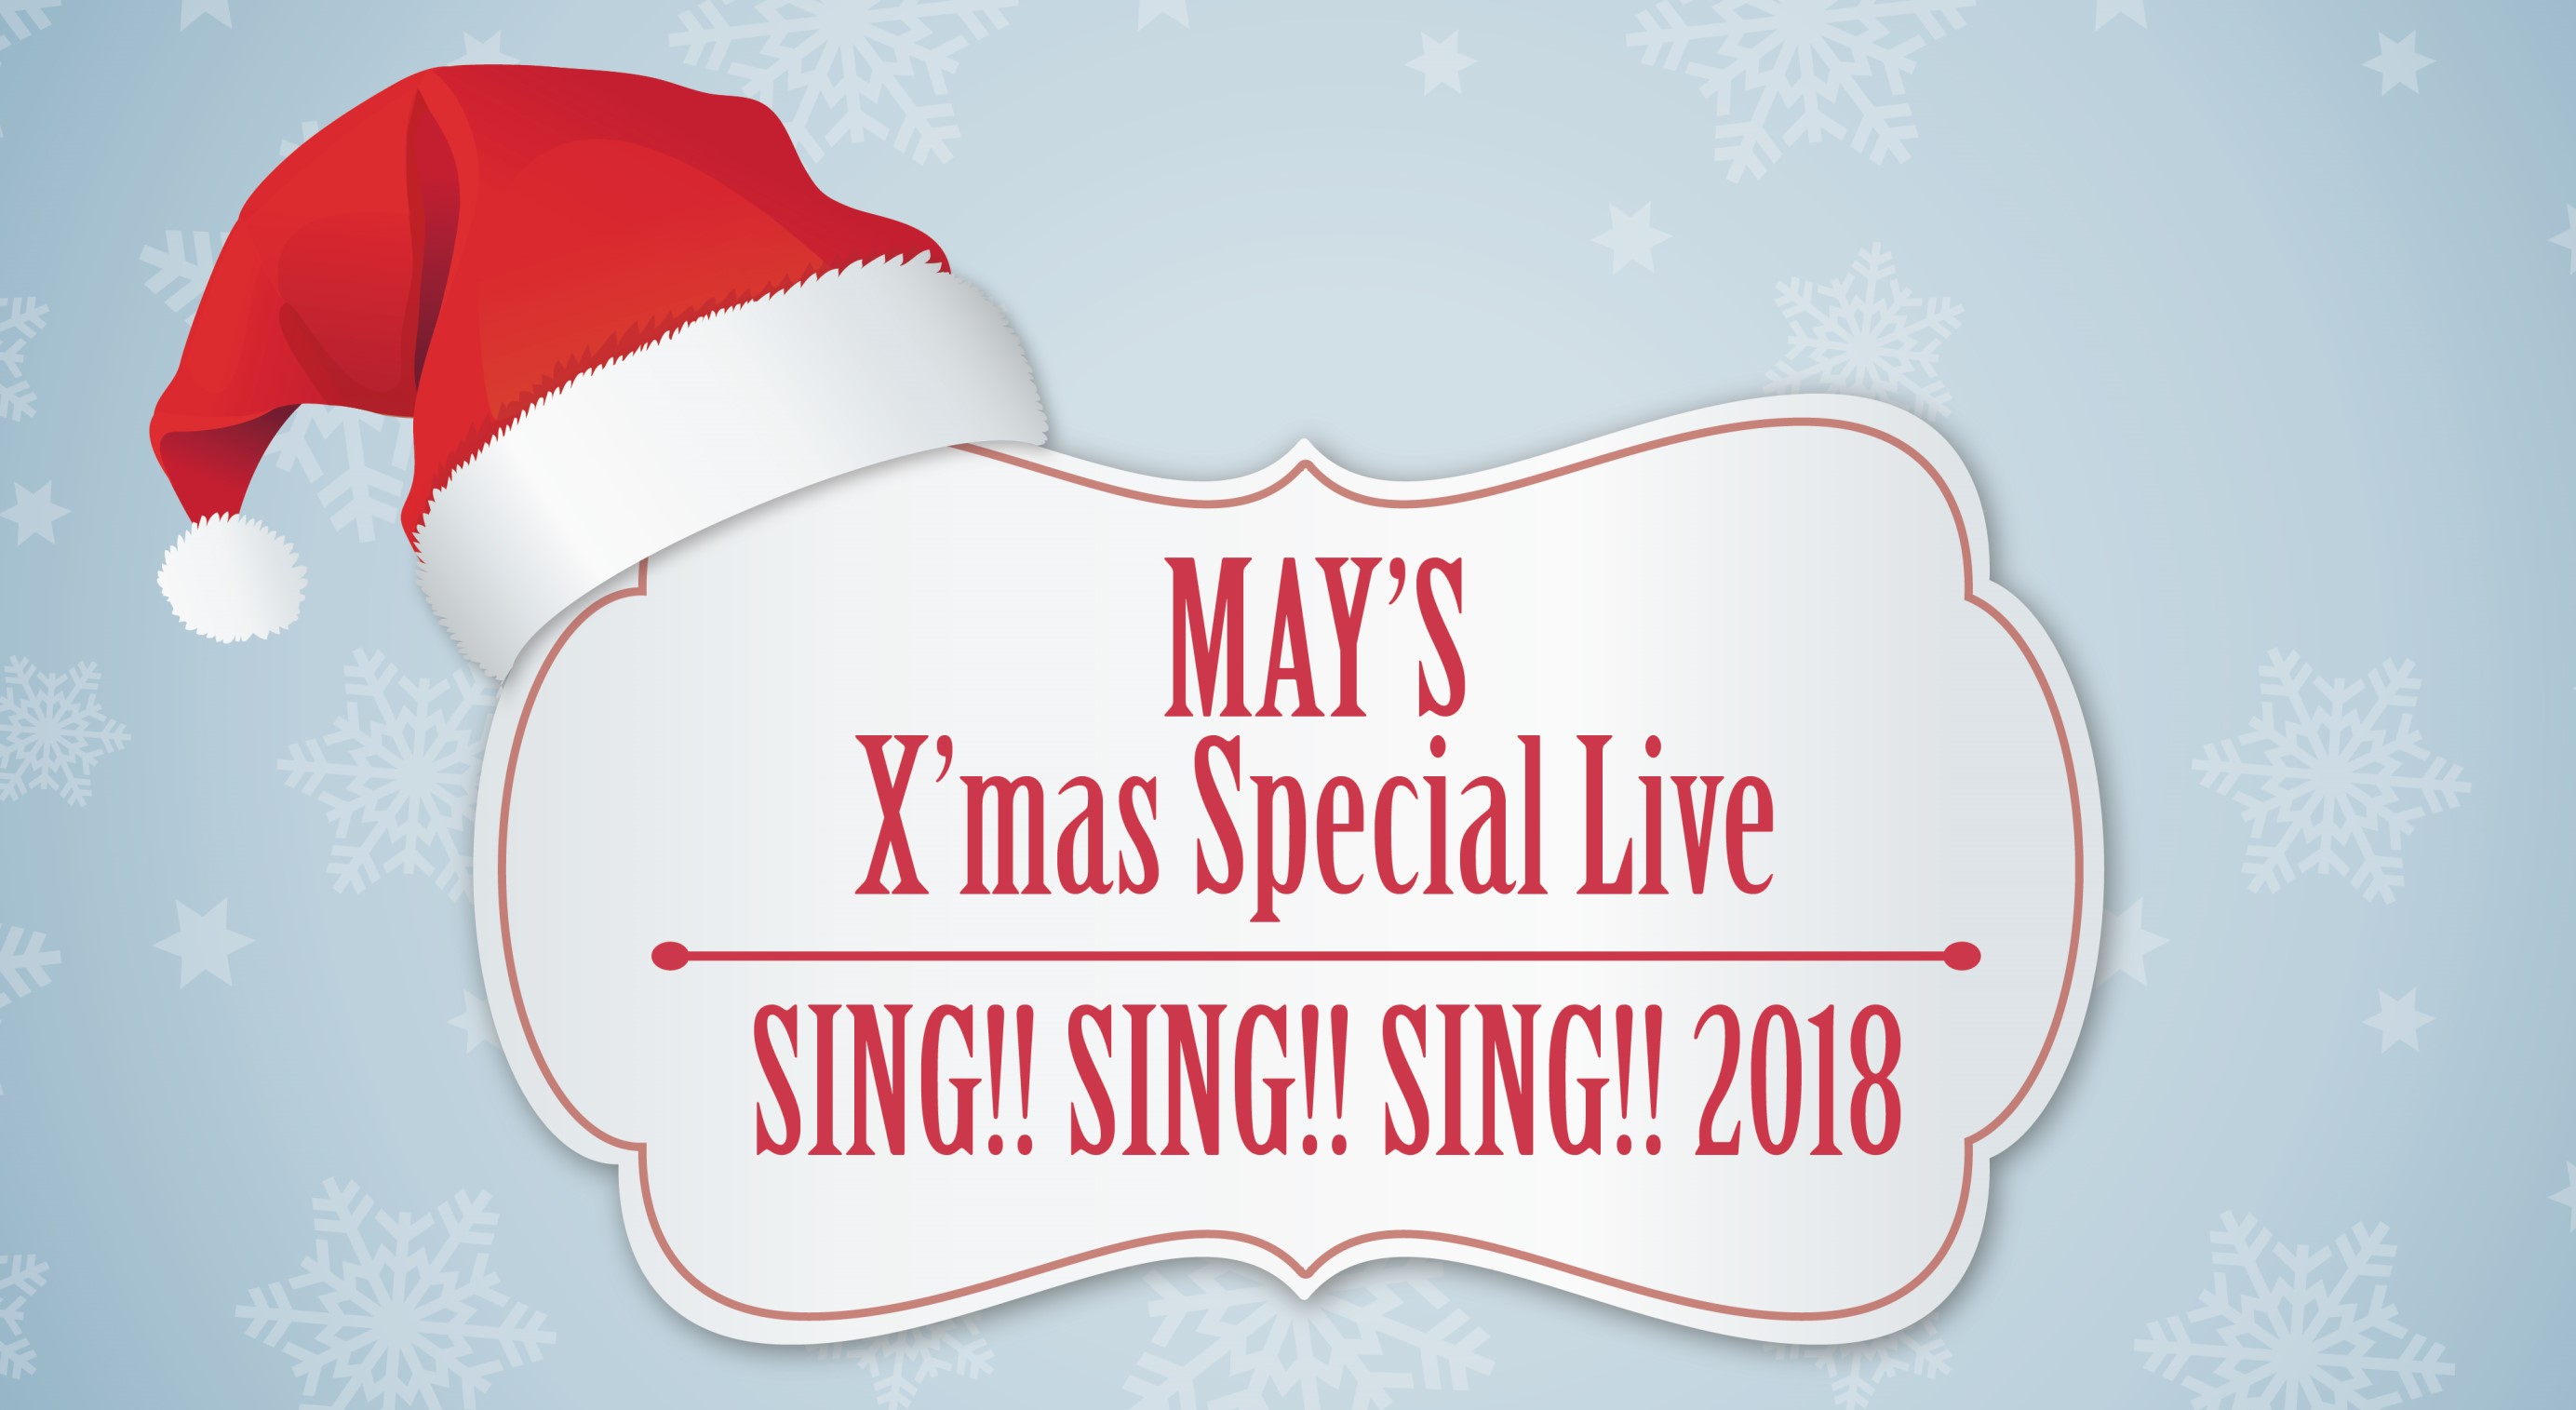 MAY’S X’mas Special Live SING SING SING!!! 2018